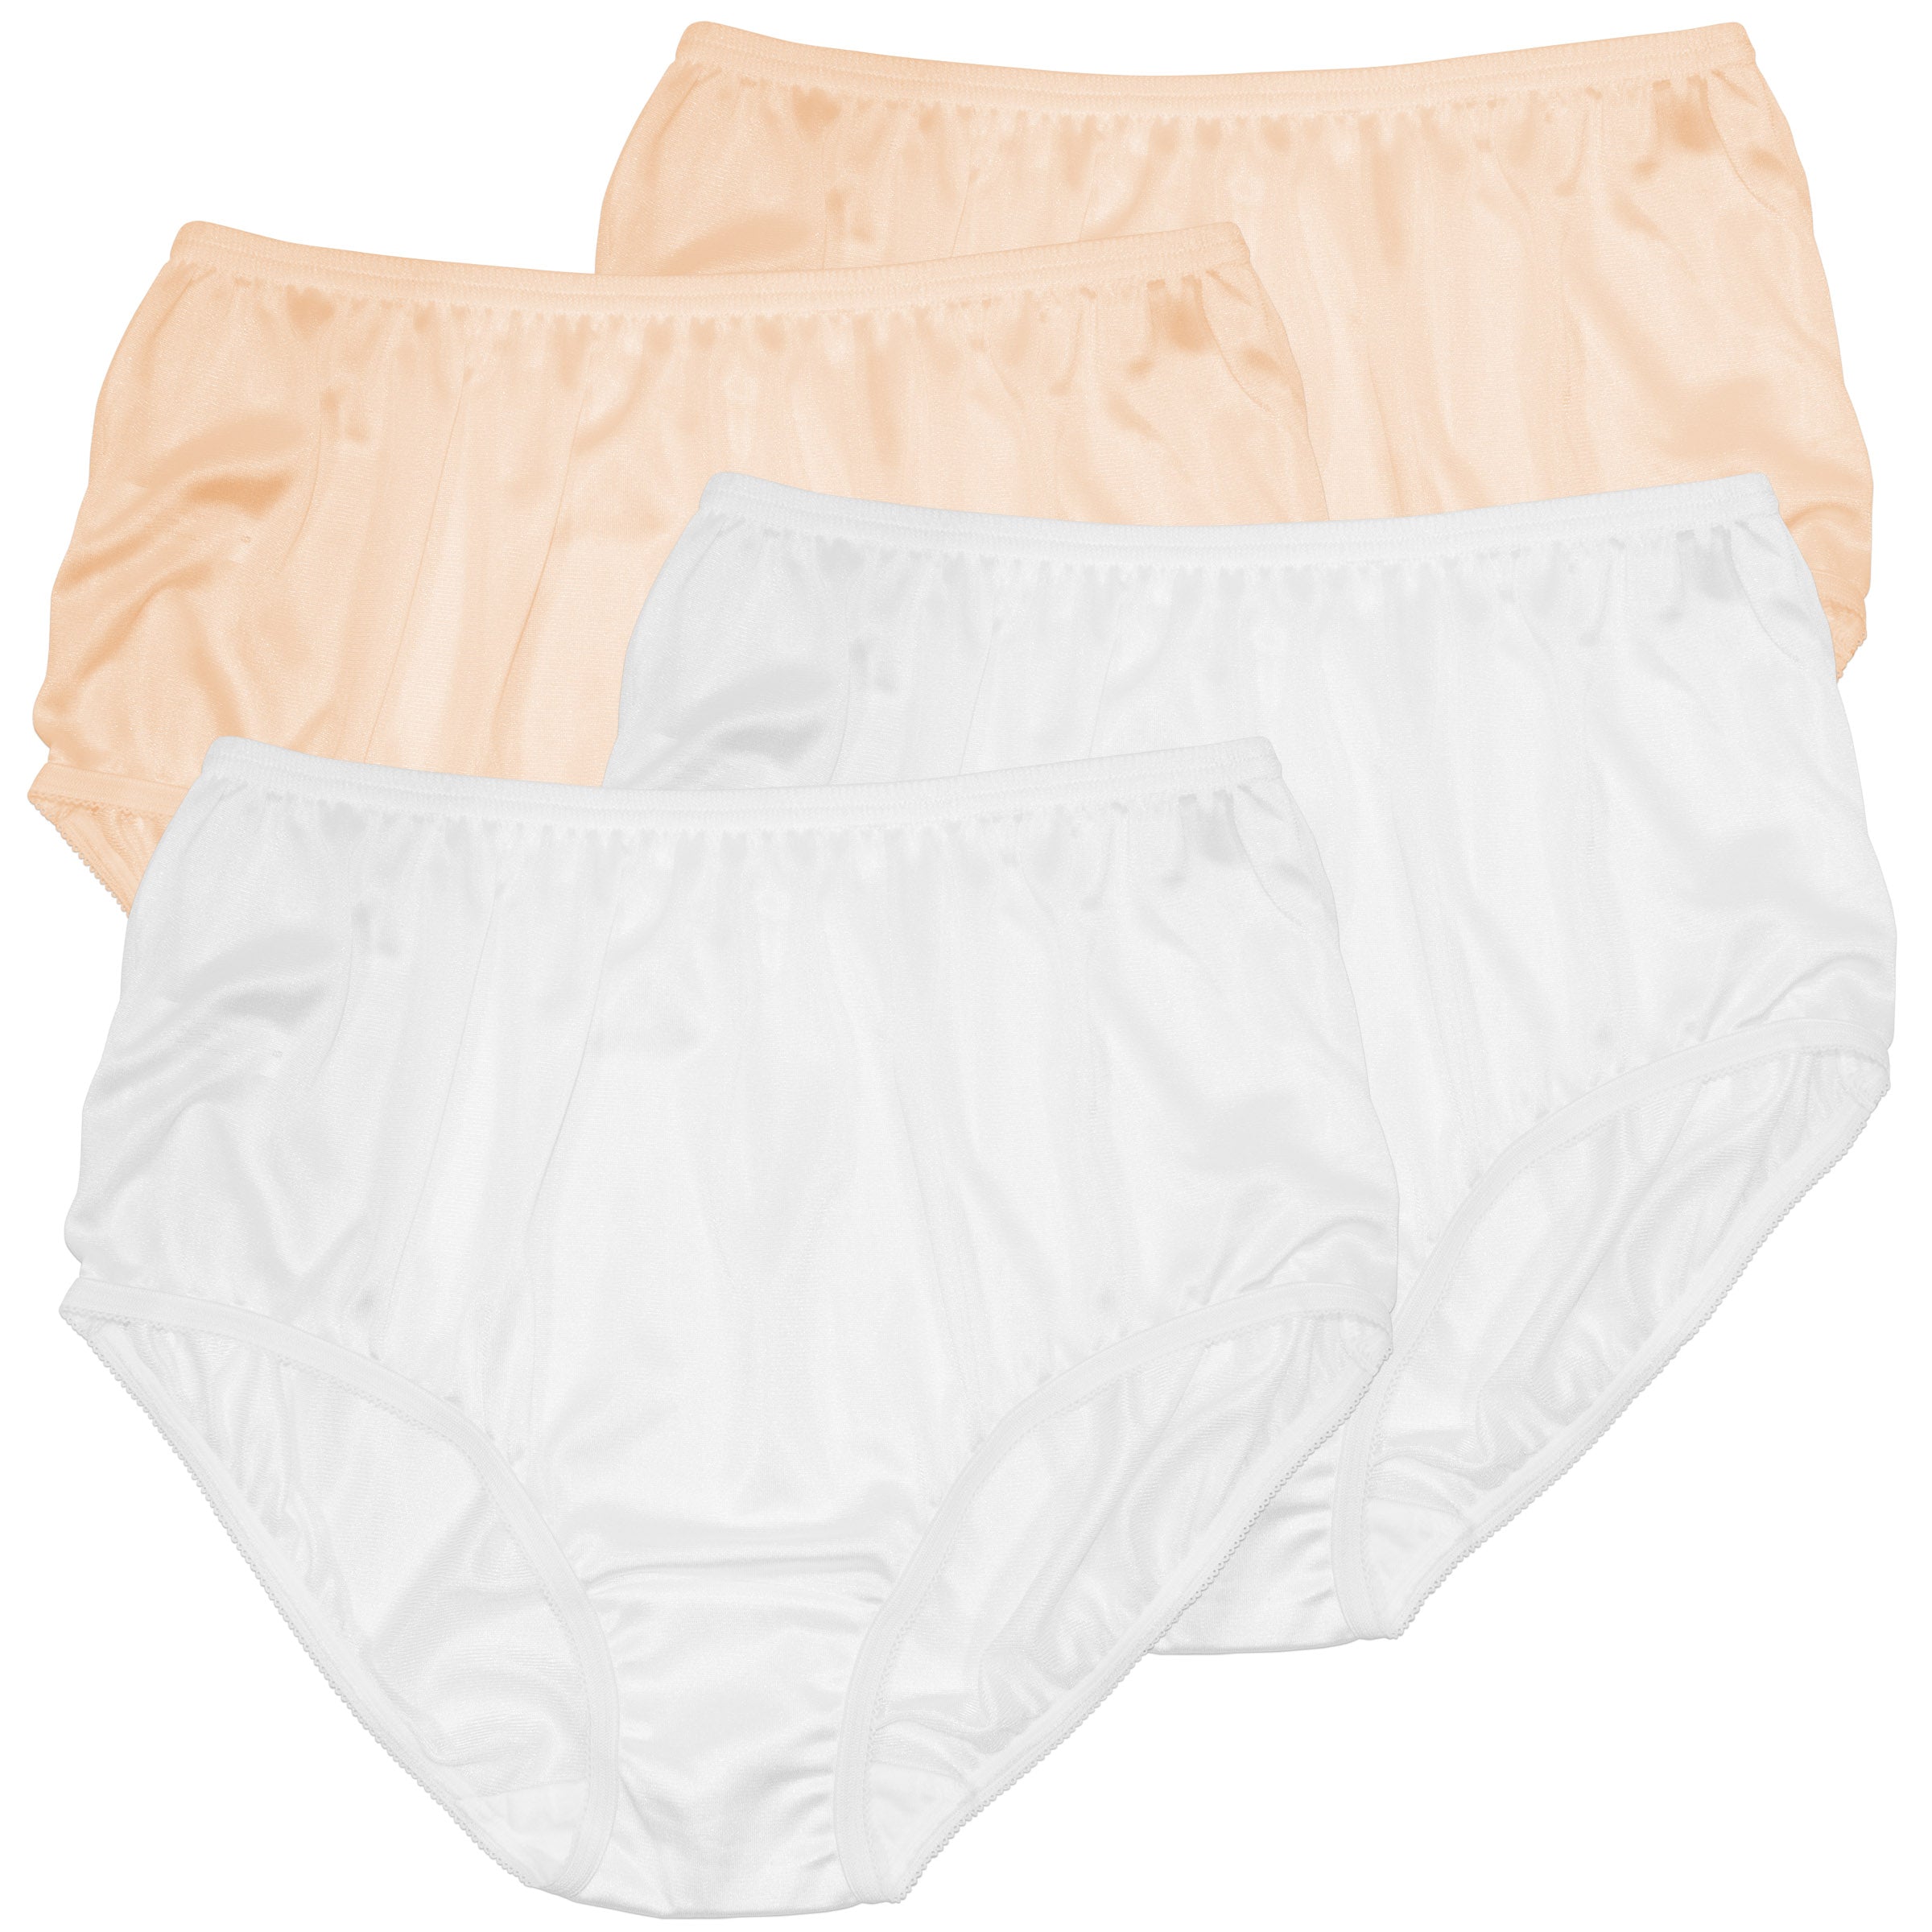 Classic Nylon, Full Coverage Brief Panty White and Beige 4 Pack (Plain Jane)